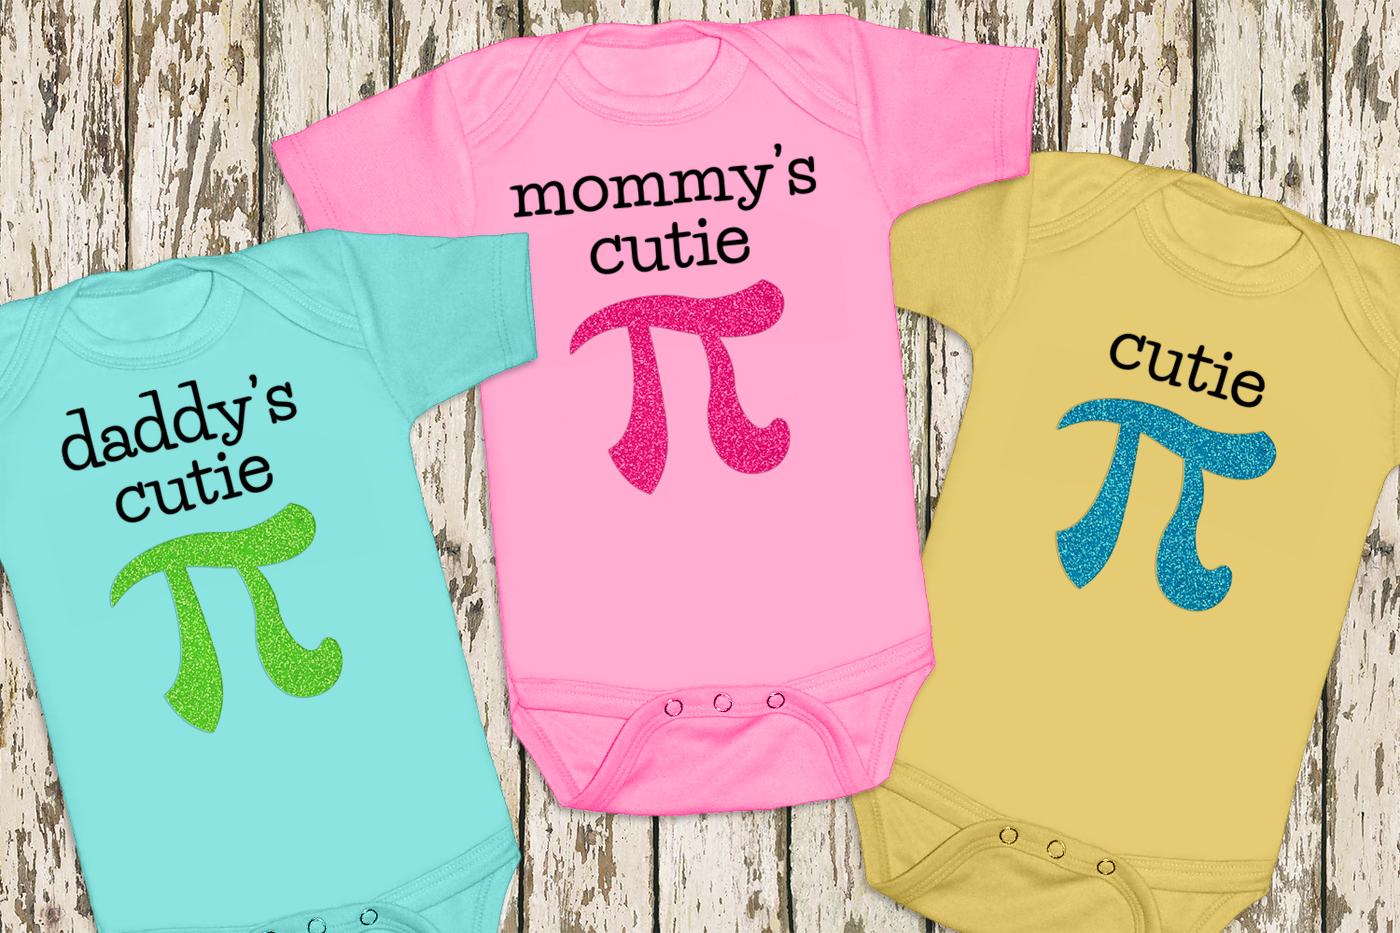 Three baby onesies in pastel colors. Each has a large pi symbol in glitter vinyl. One says "daddy's cutie," one says "mommy's cutie," and one says "cutie." When read with the pi symbol, these read as "cutie pie."